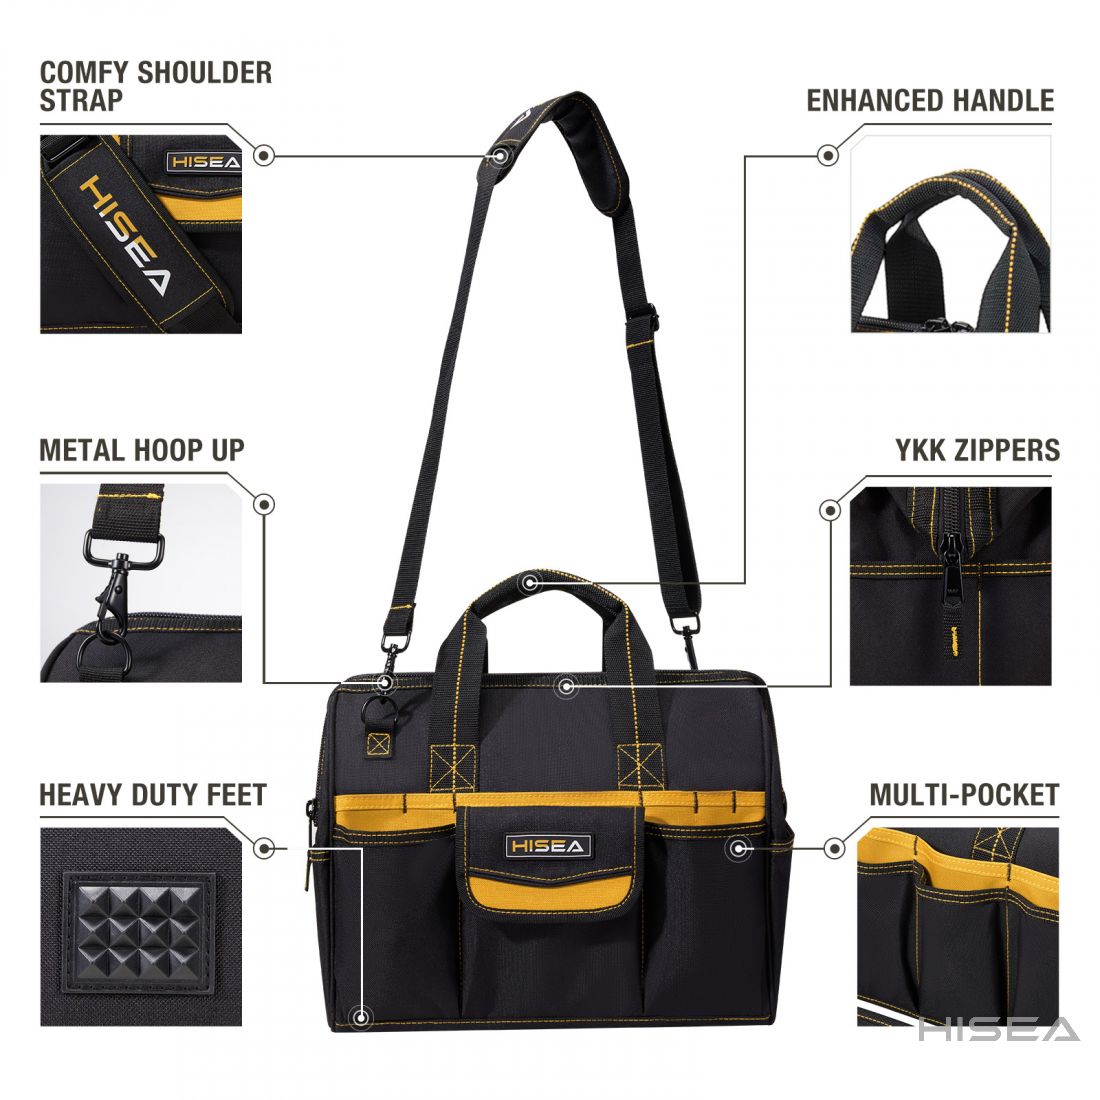 Wide Mouth Tool Bag